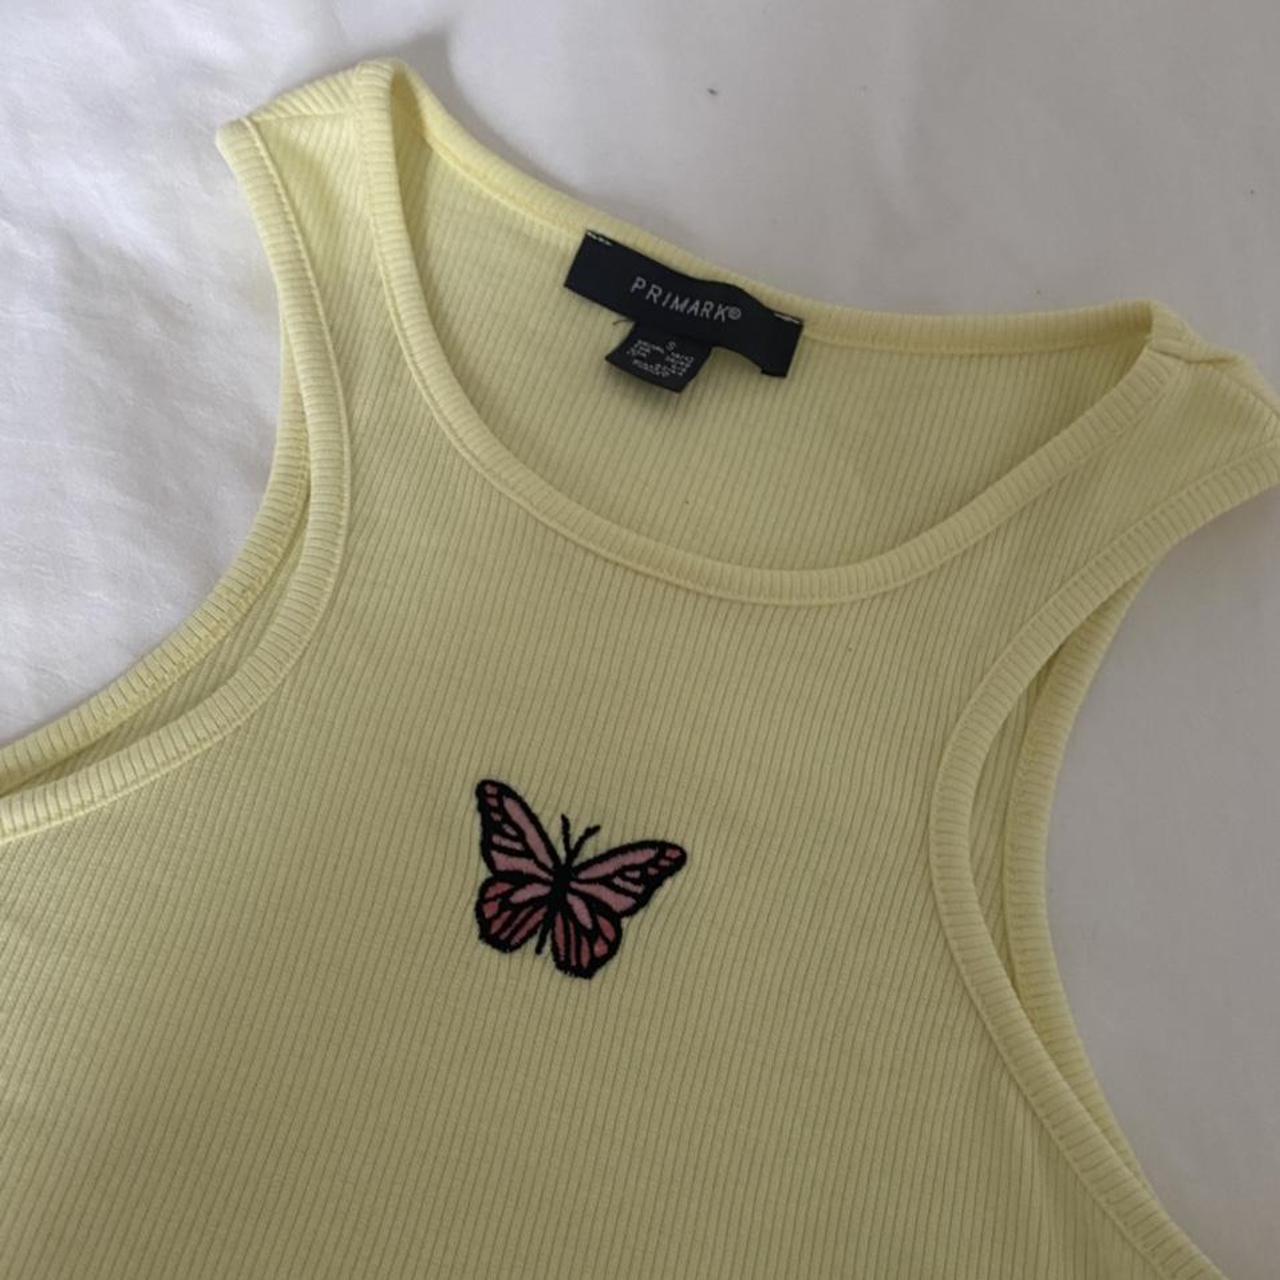 Product Image 2 - Primark yellow butterfly tank top